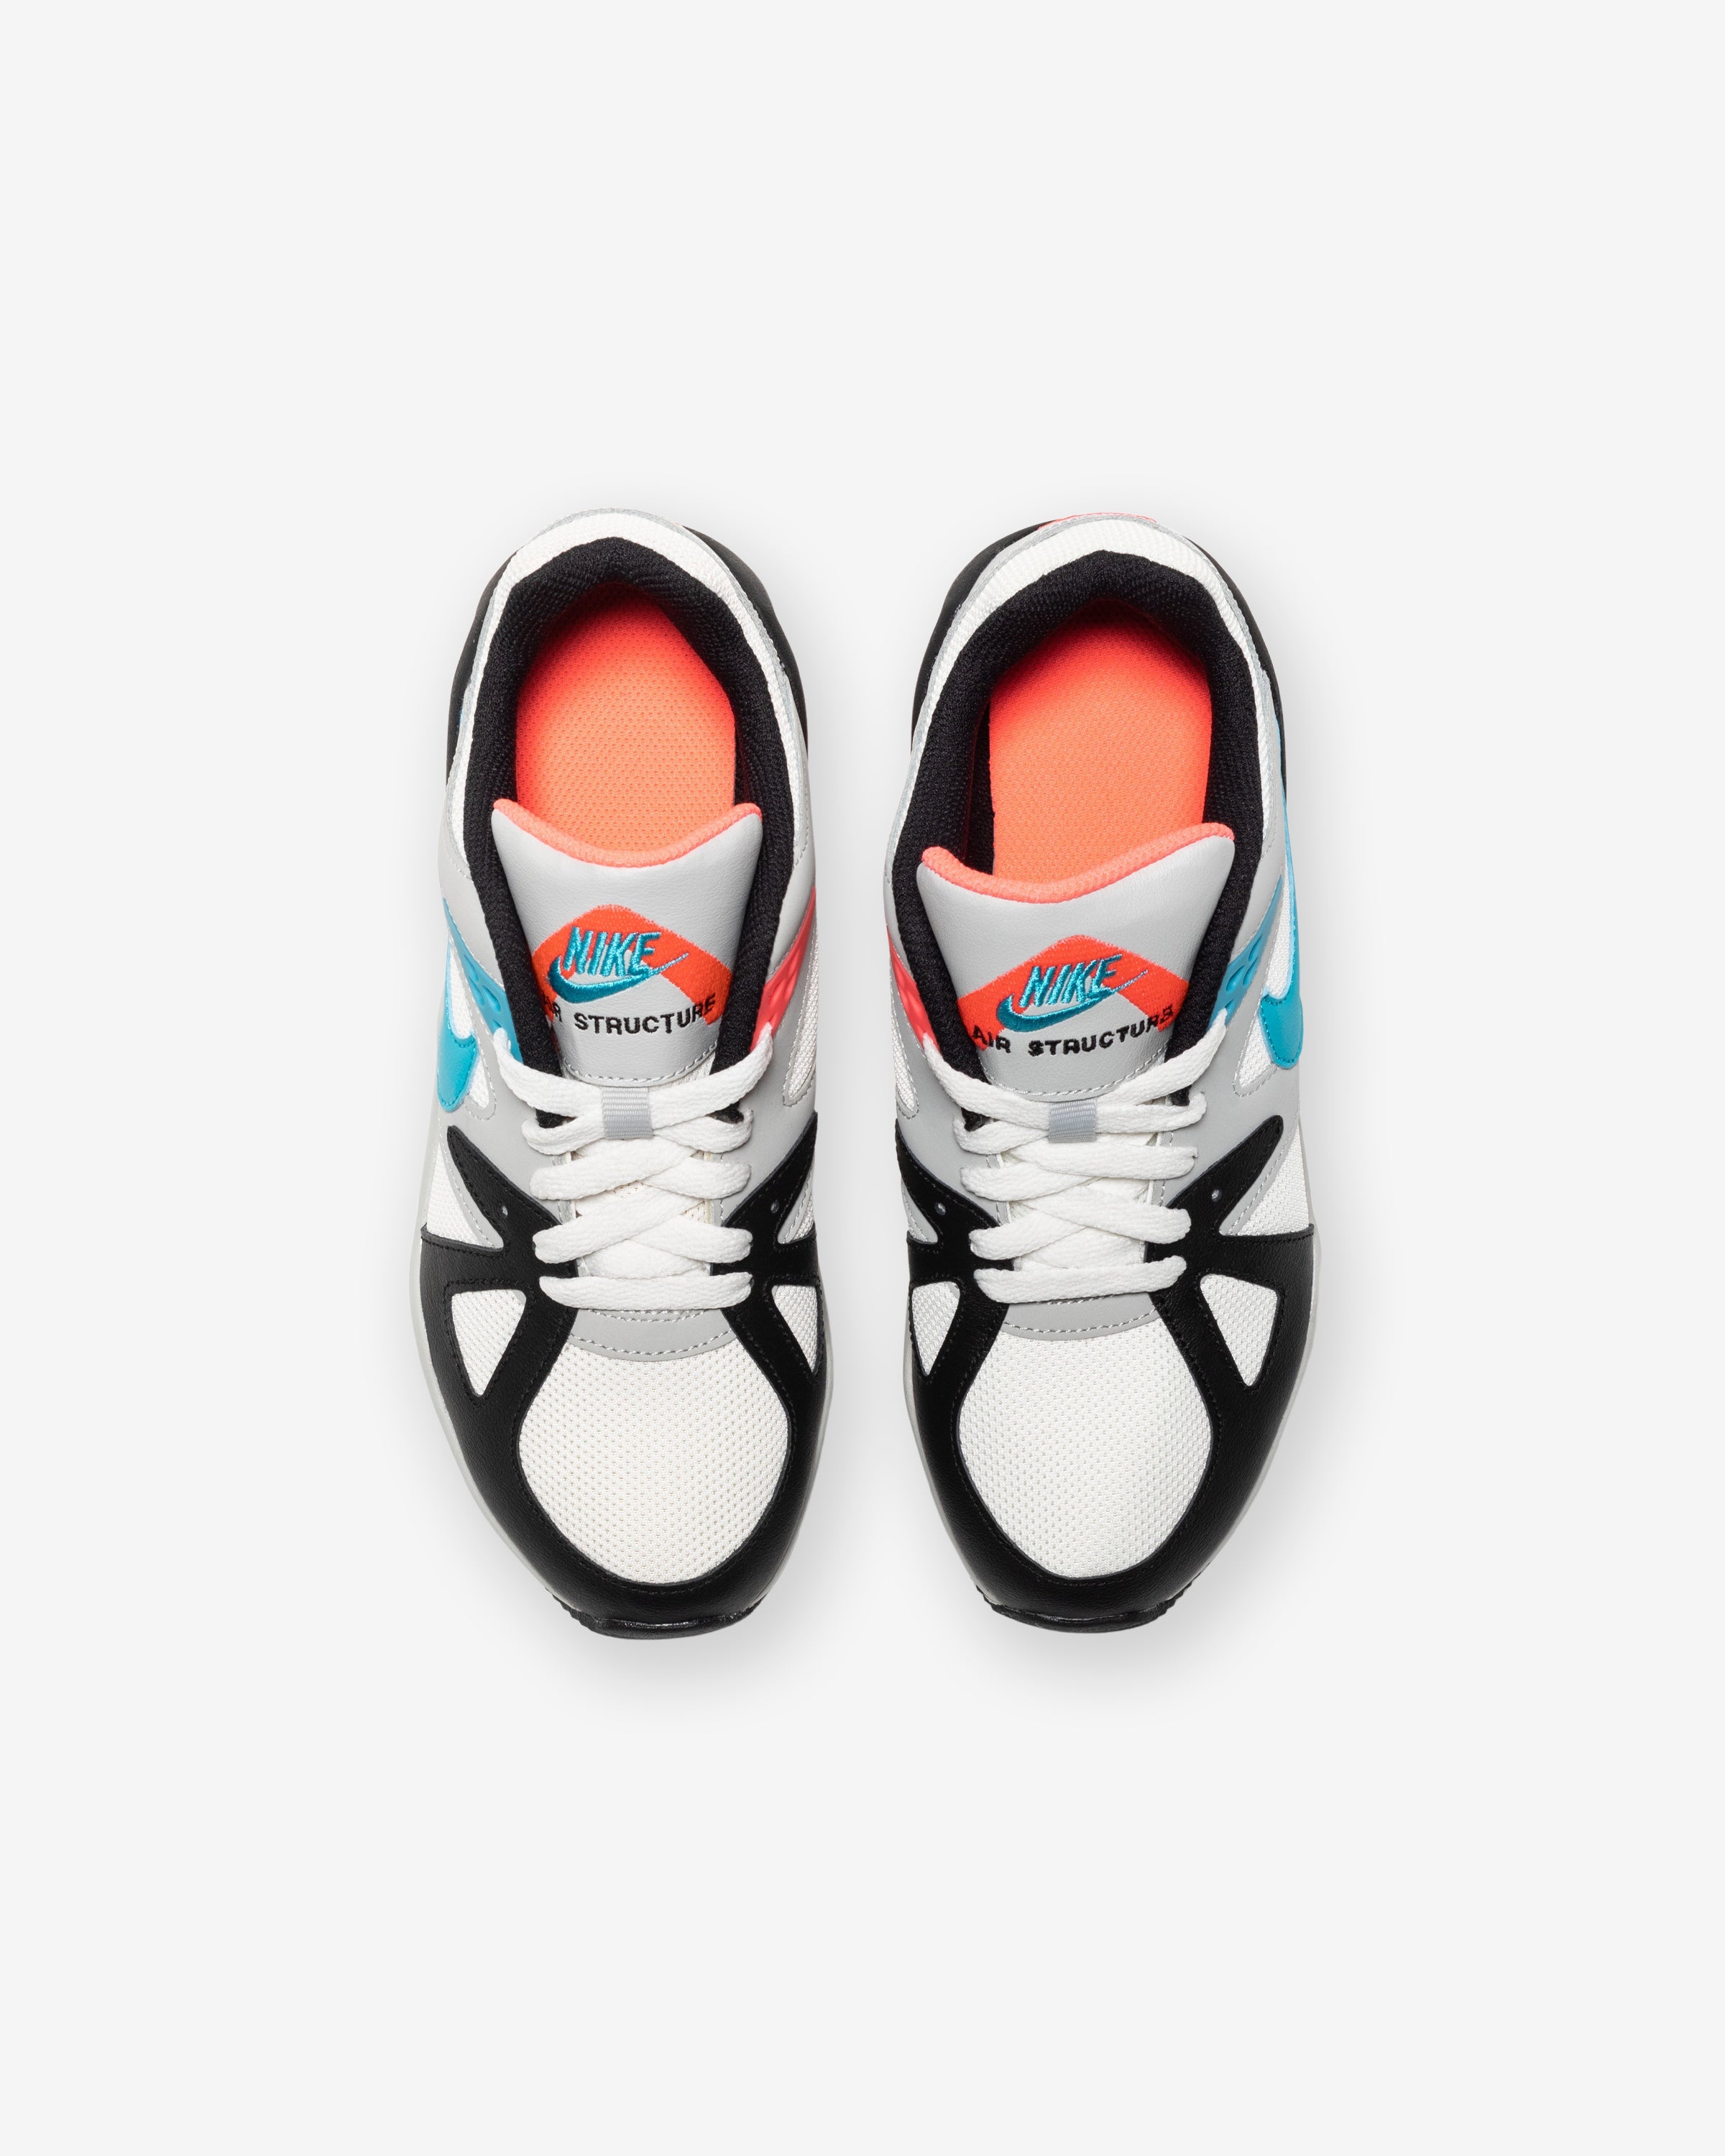 NIKE GS AIR STRUCTURE - SUMMITWHITE/ NEOTEAL/ BLACK/ INFRARED